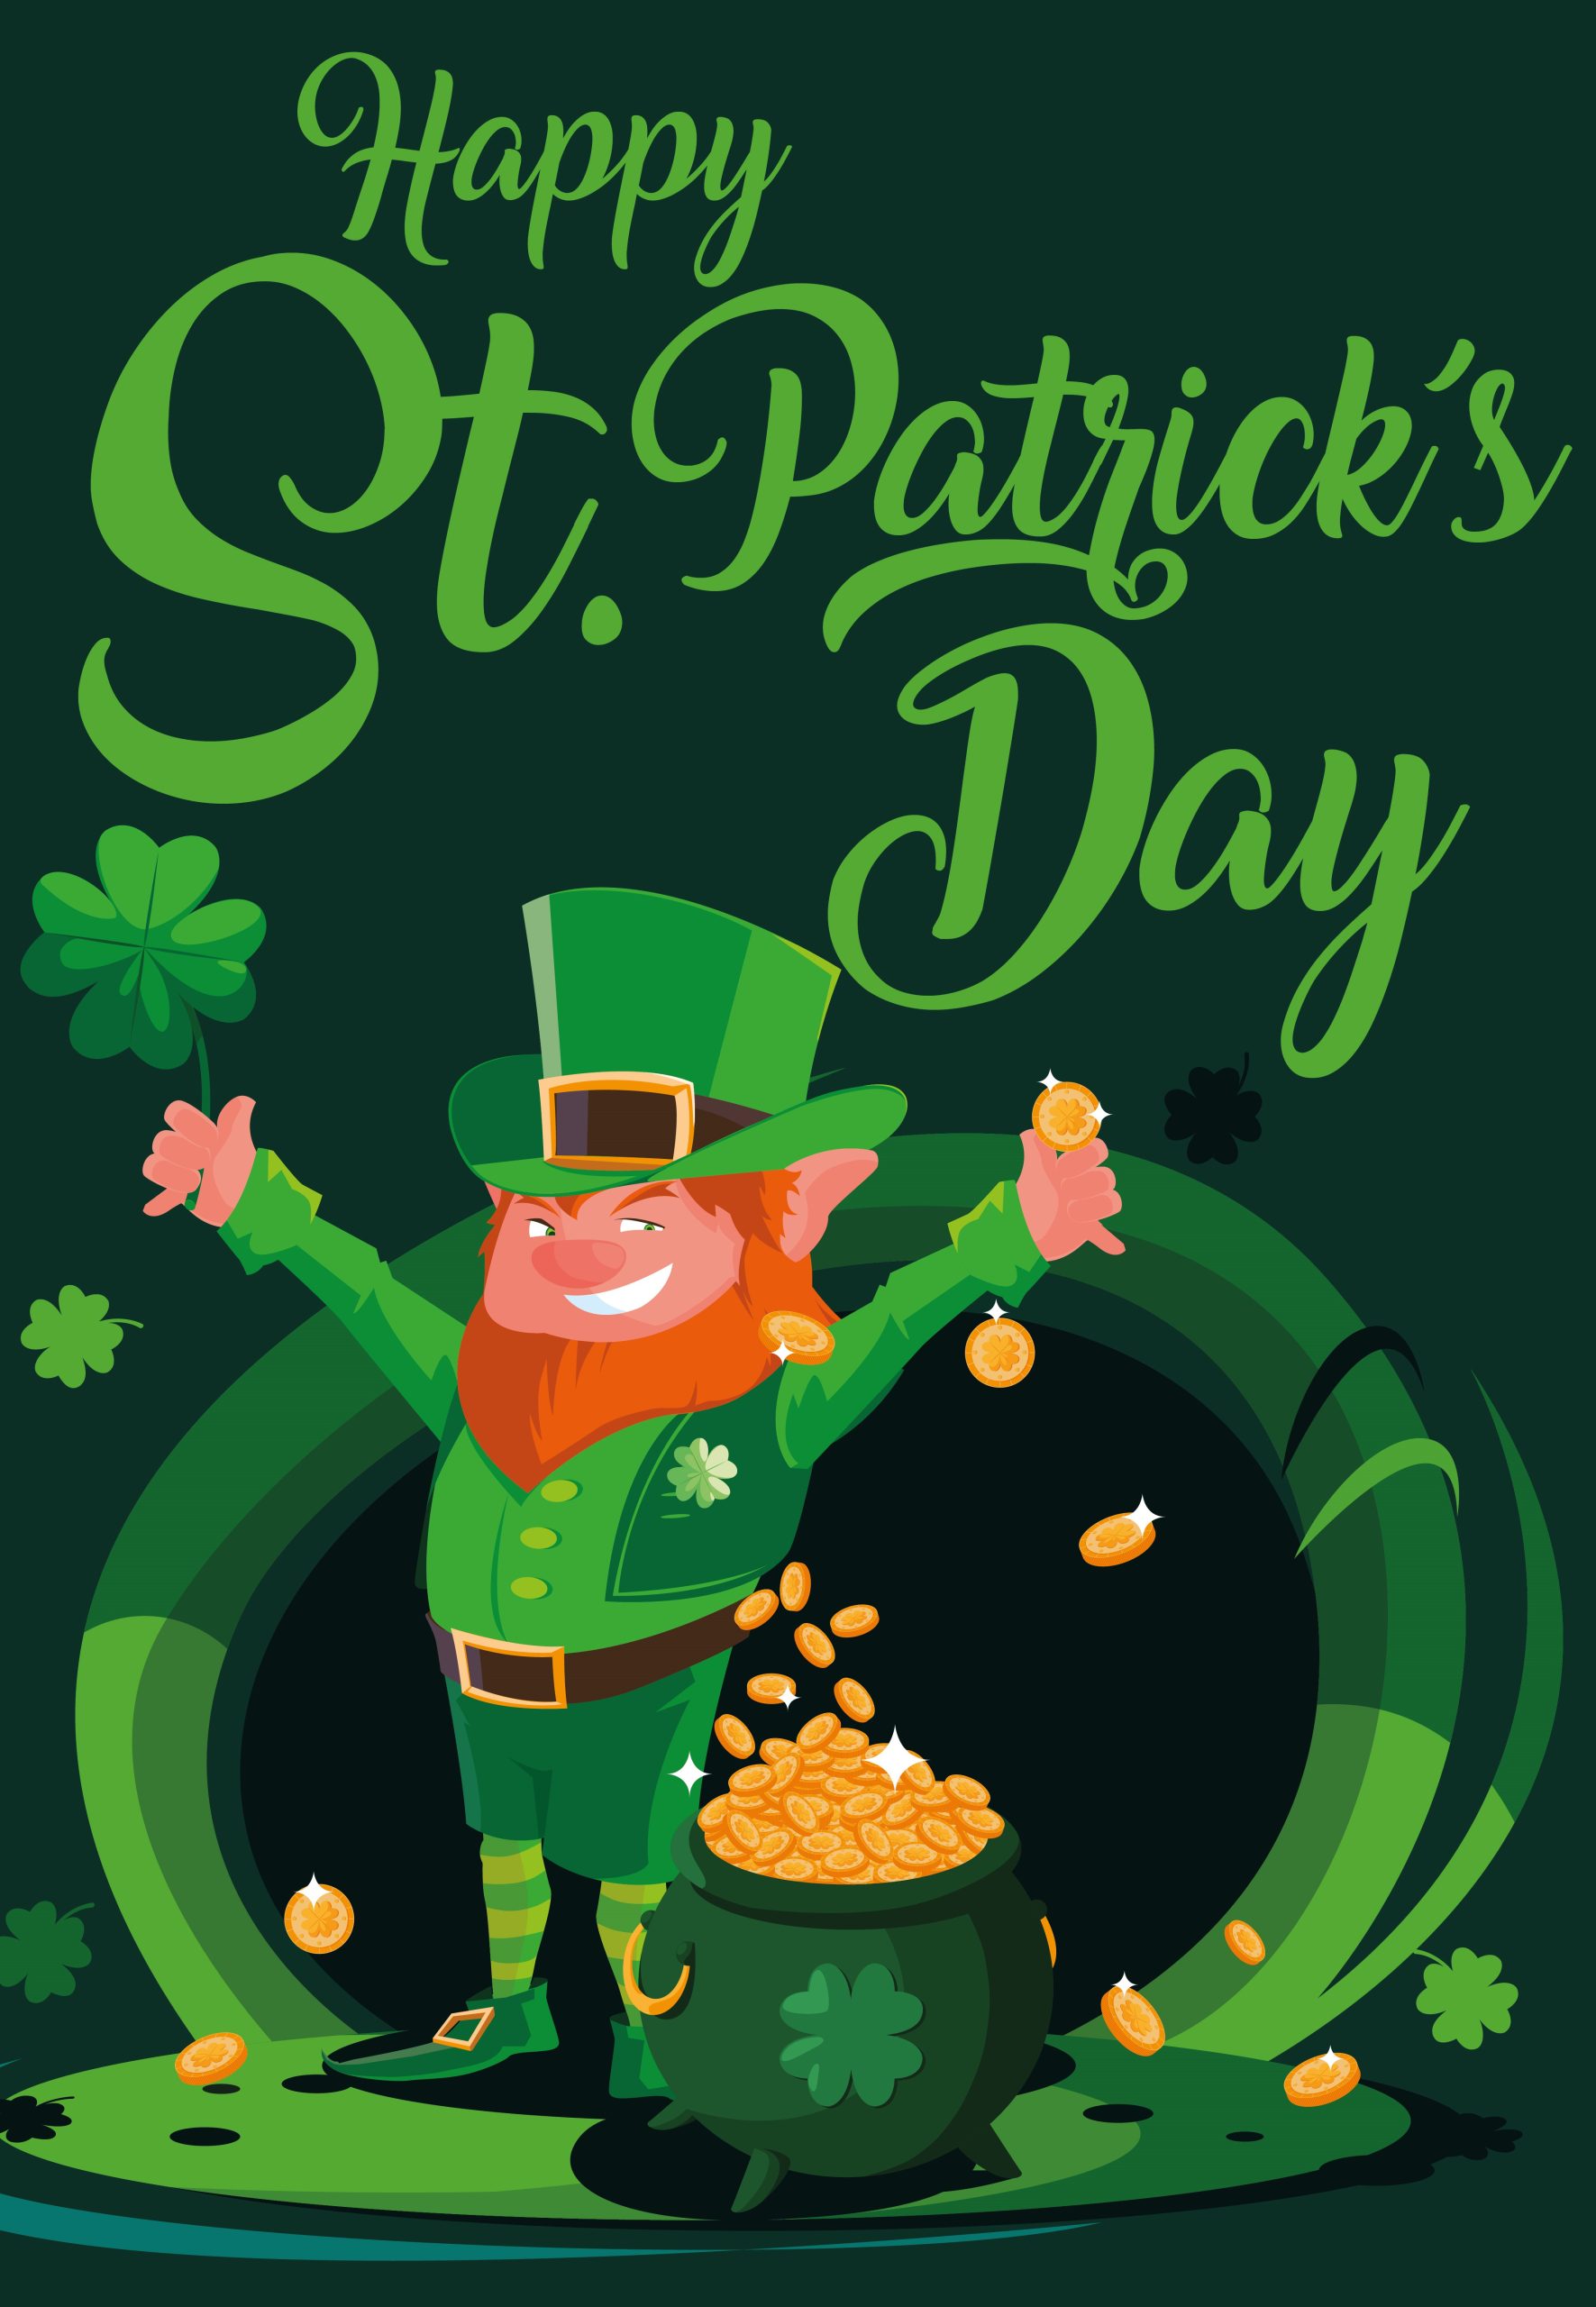 Fun Facts About St. Patrick’s Day!